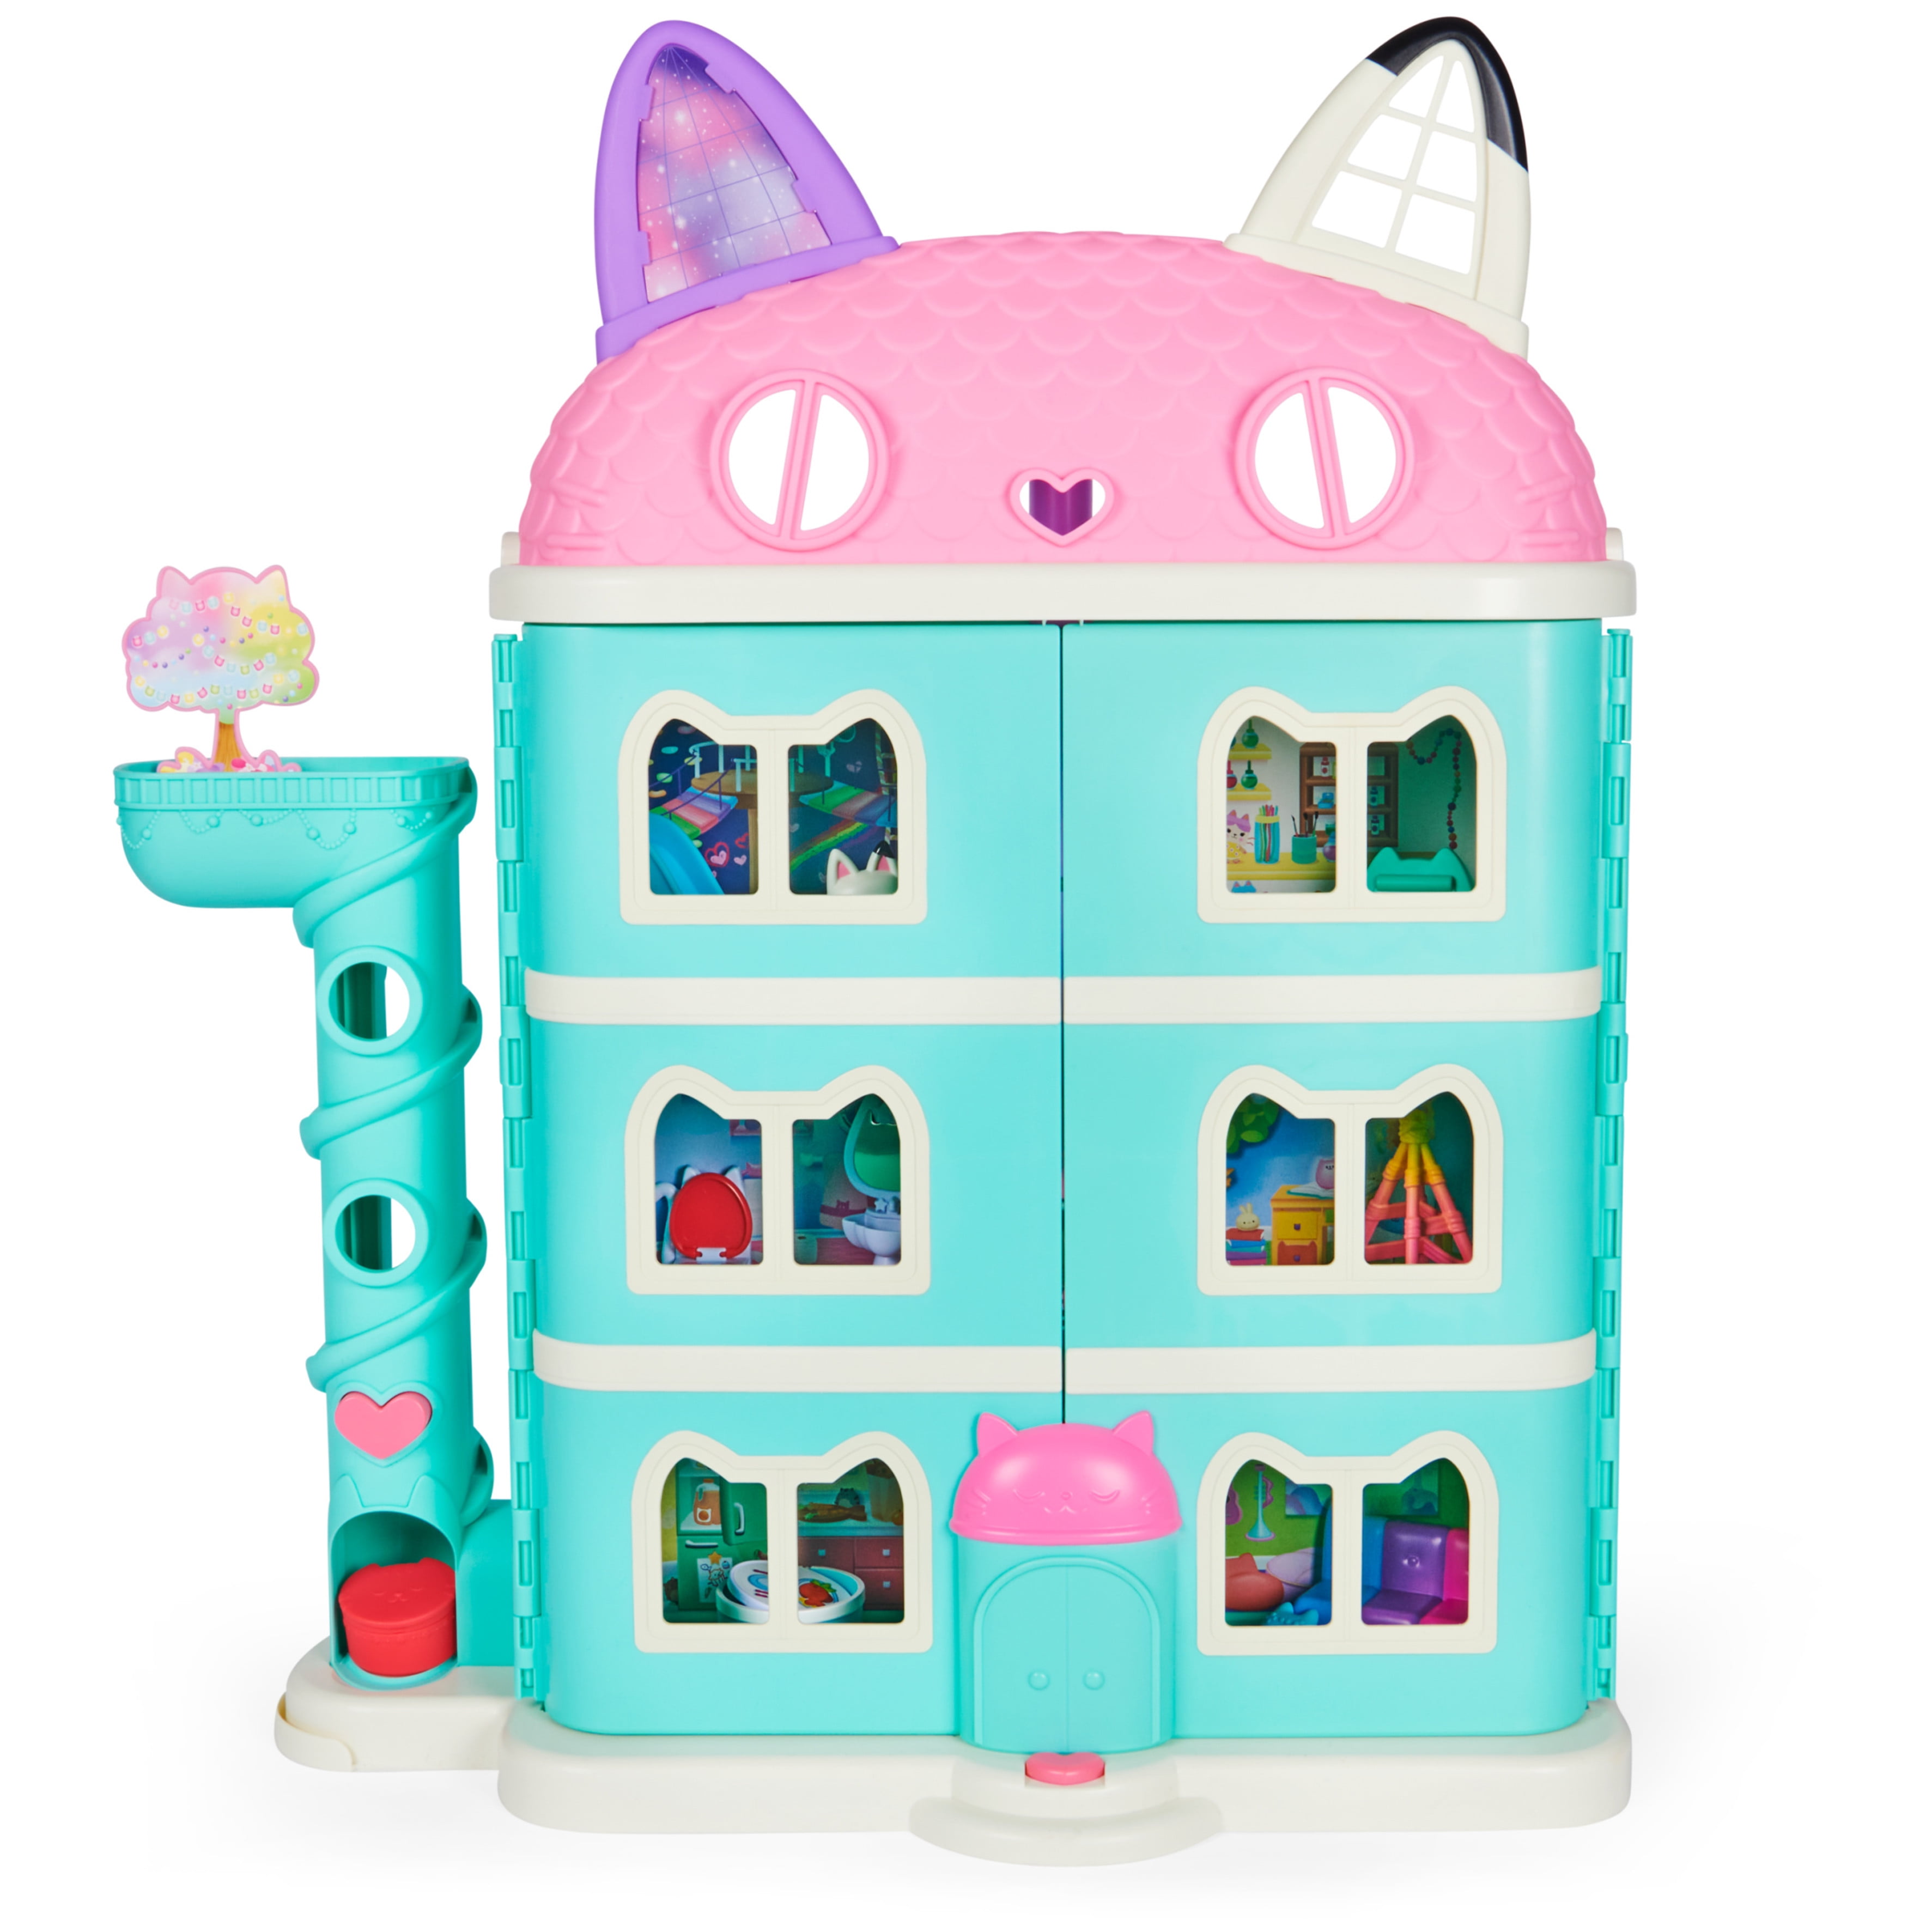 Gabby's Dollhouse, Purrfect Dollhouse 2-Foot Tall Playset with Sounds, 15 Pieces - 3